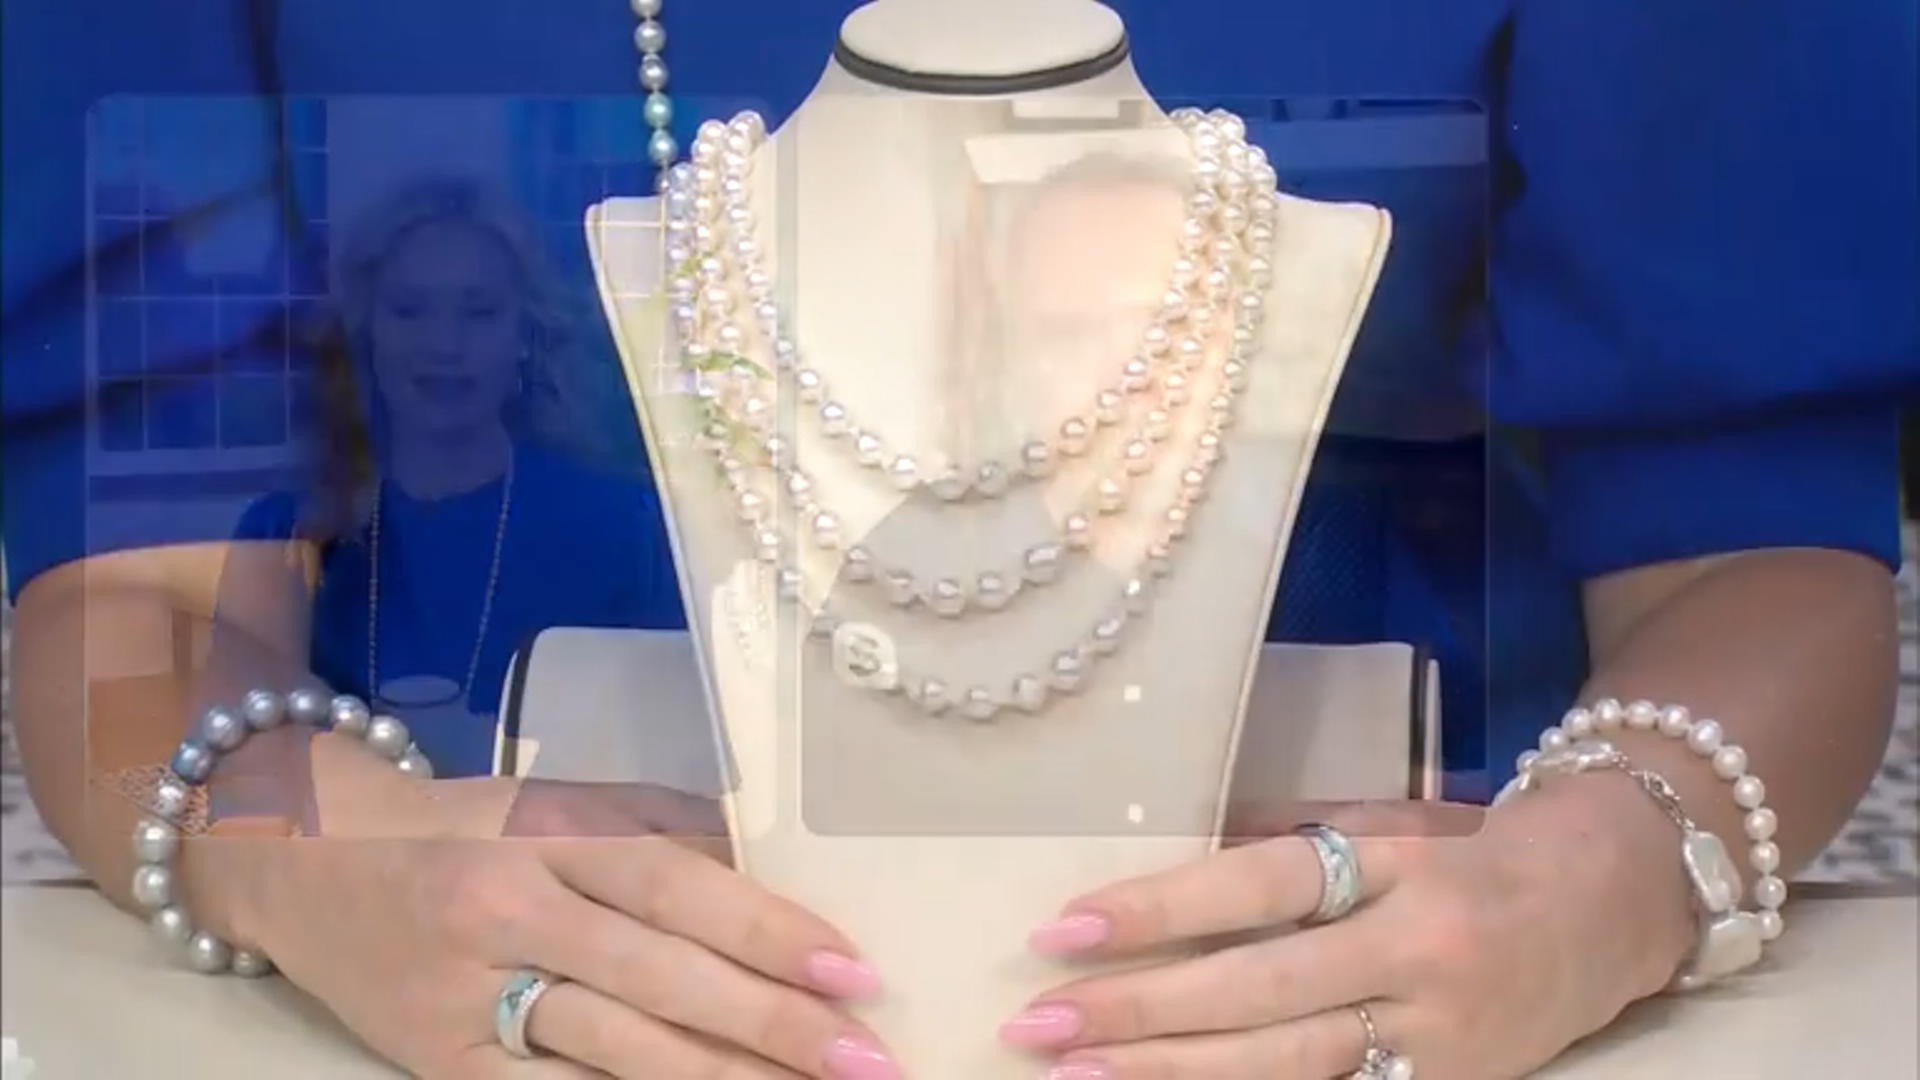 White Cultured Akoya Pearl Rhodium Over Sterling Silver 18 Inch Strand Necklace Video Thumbnail